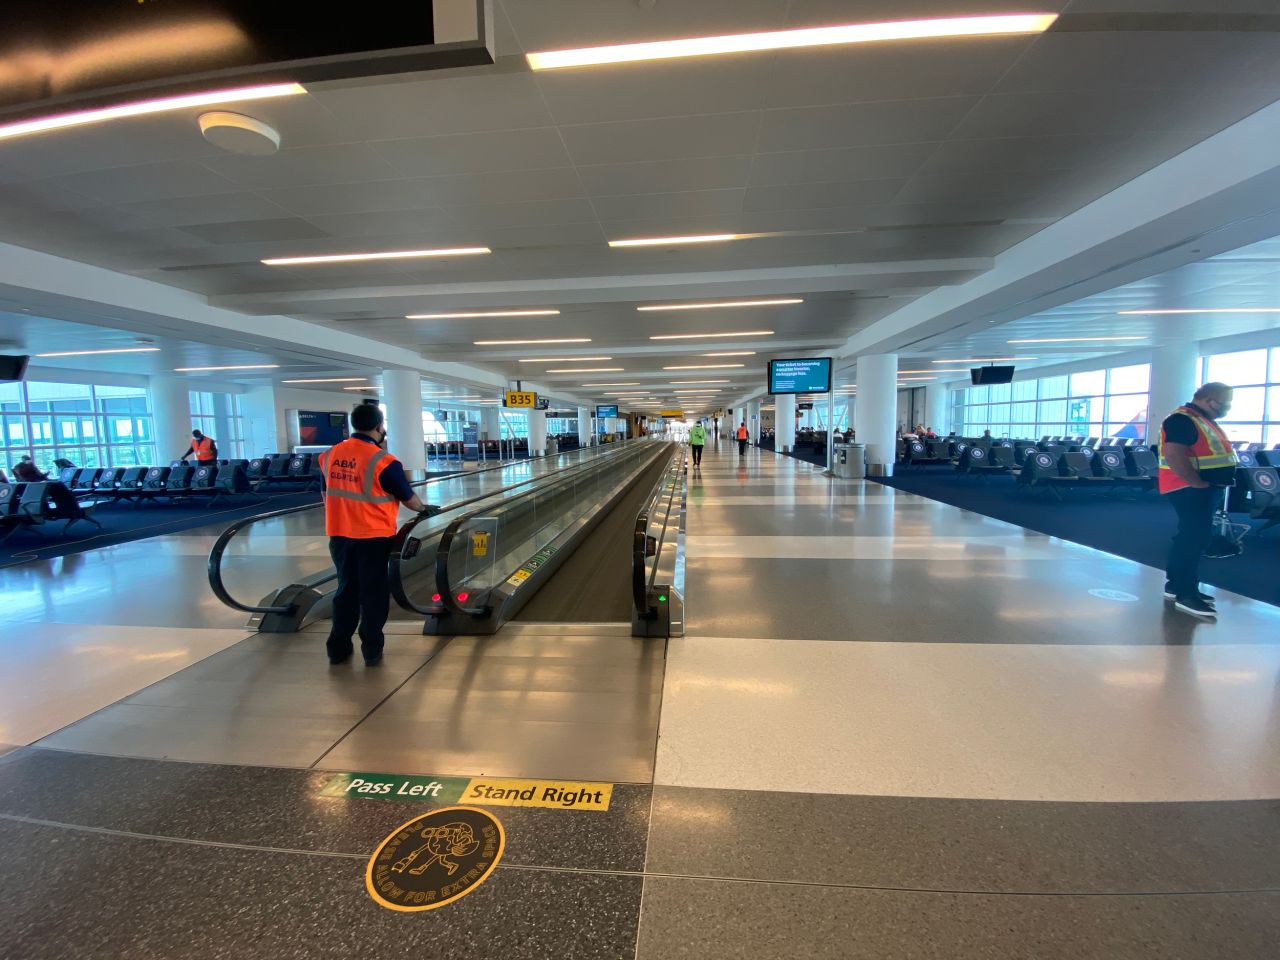 On a recent visit to Terminal 4 at JFK, there appeared to be almost as many cleaning staff as travelers.